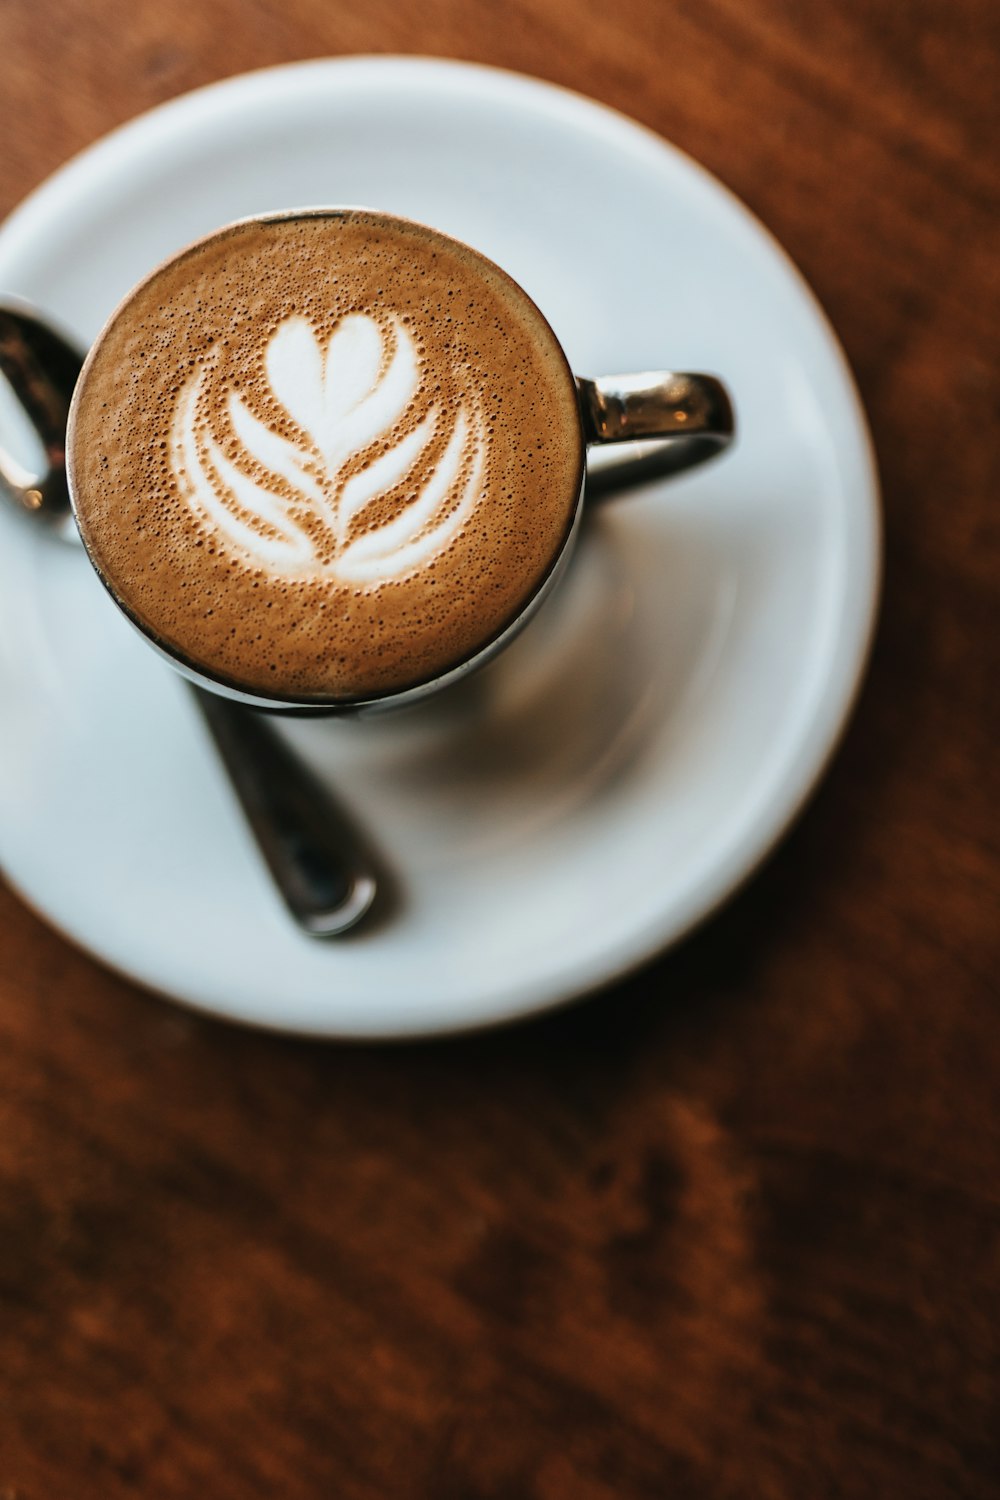 Coffee on cup and saucer photo – Free Coffee Image on Unsplash